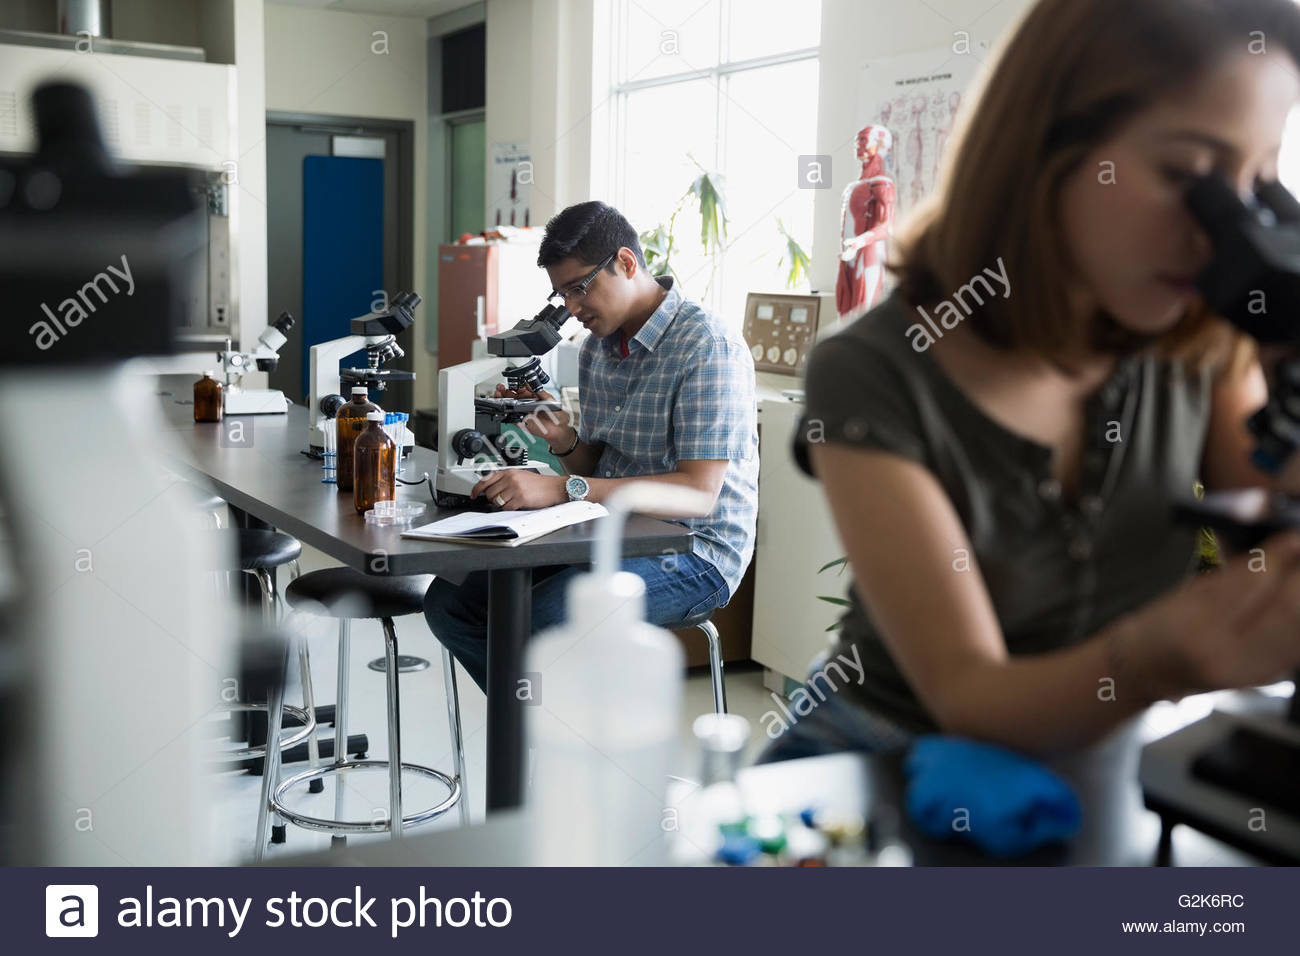 College student using microscope in science laboratory Stock Photo